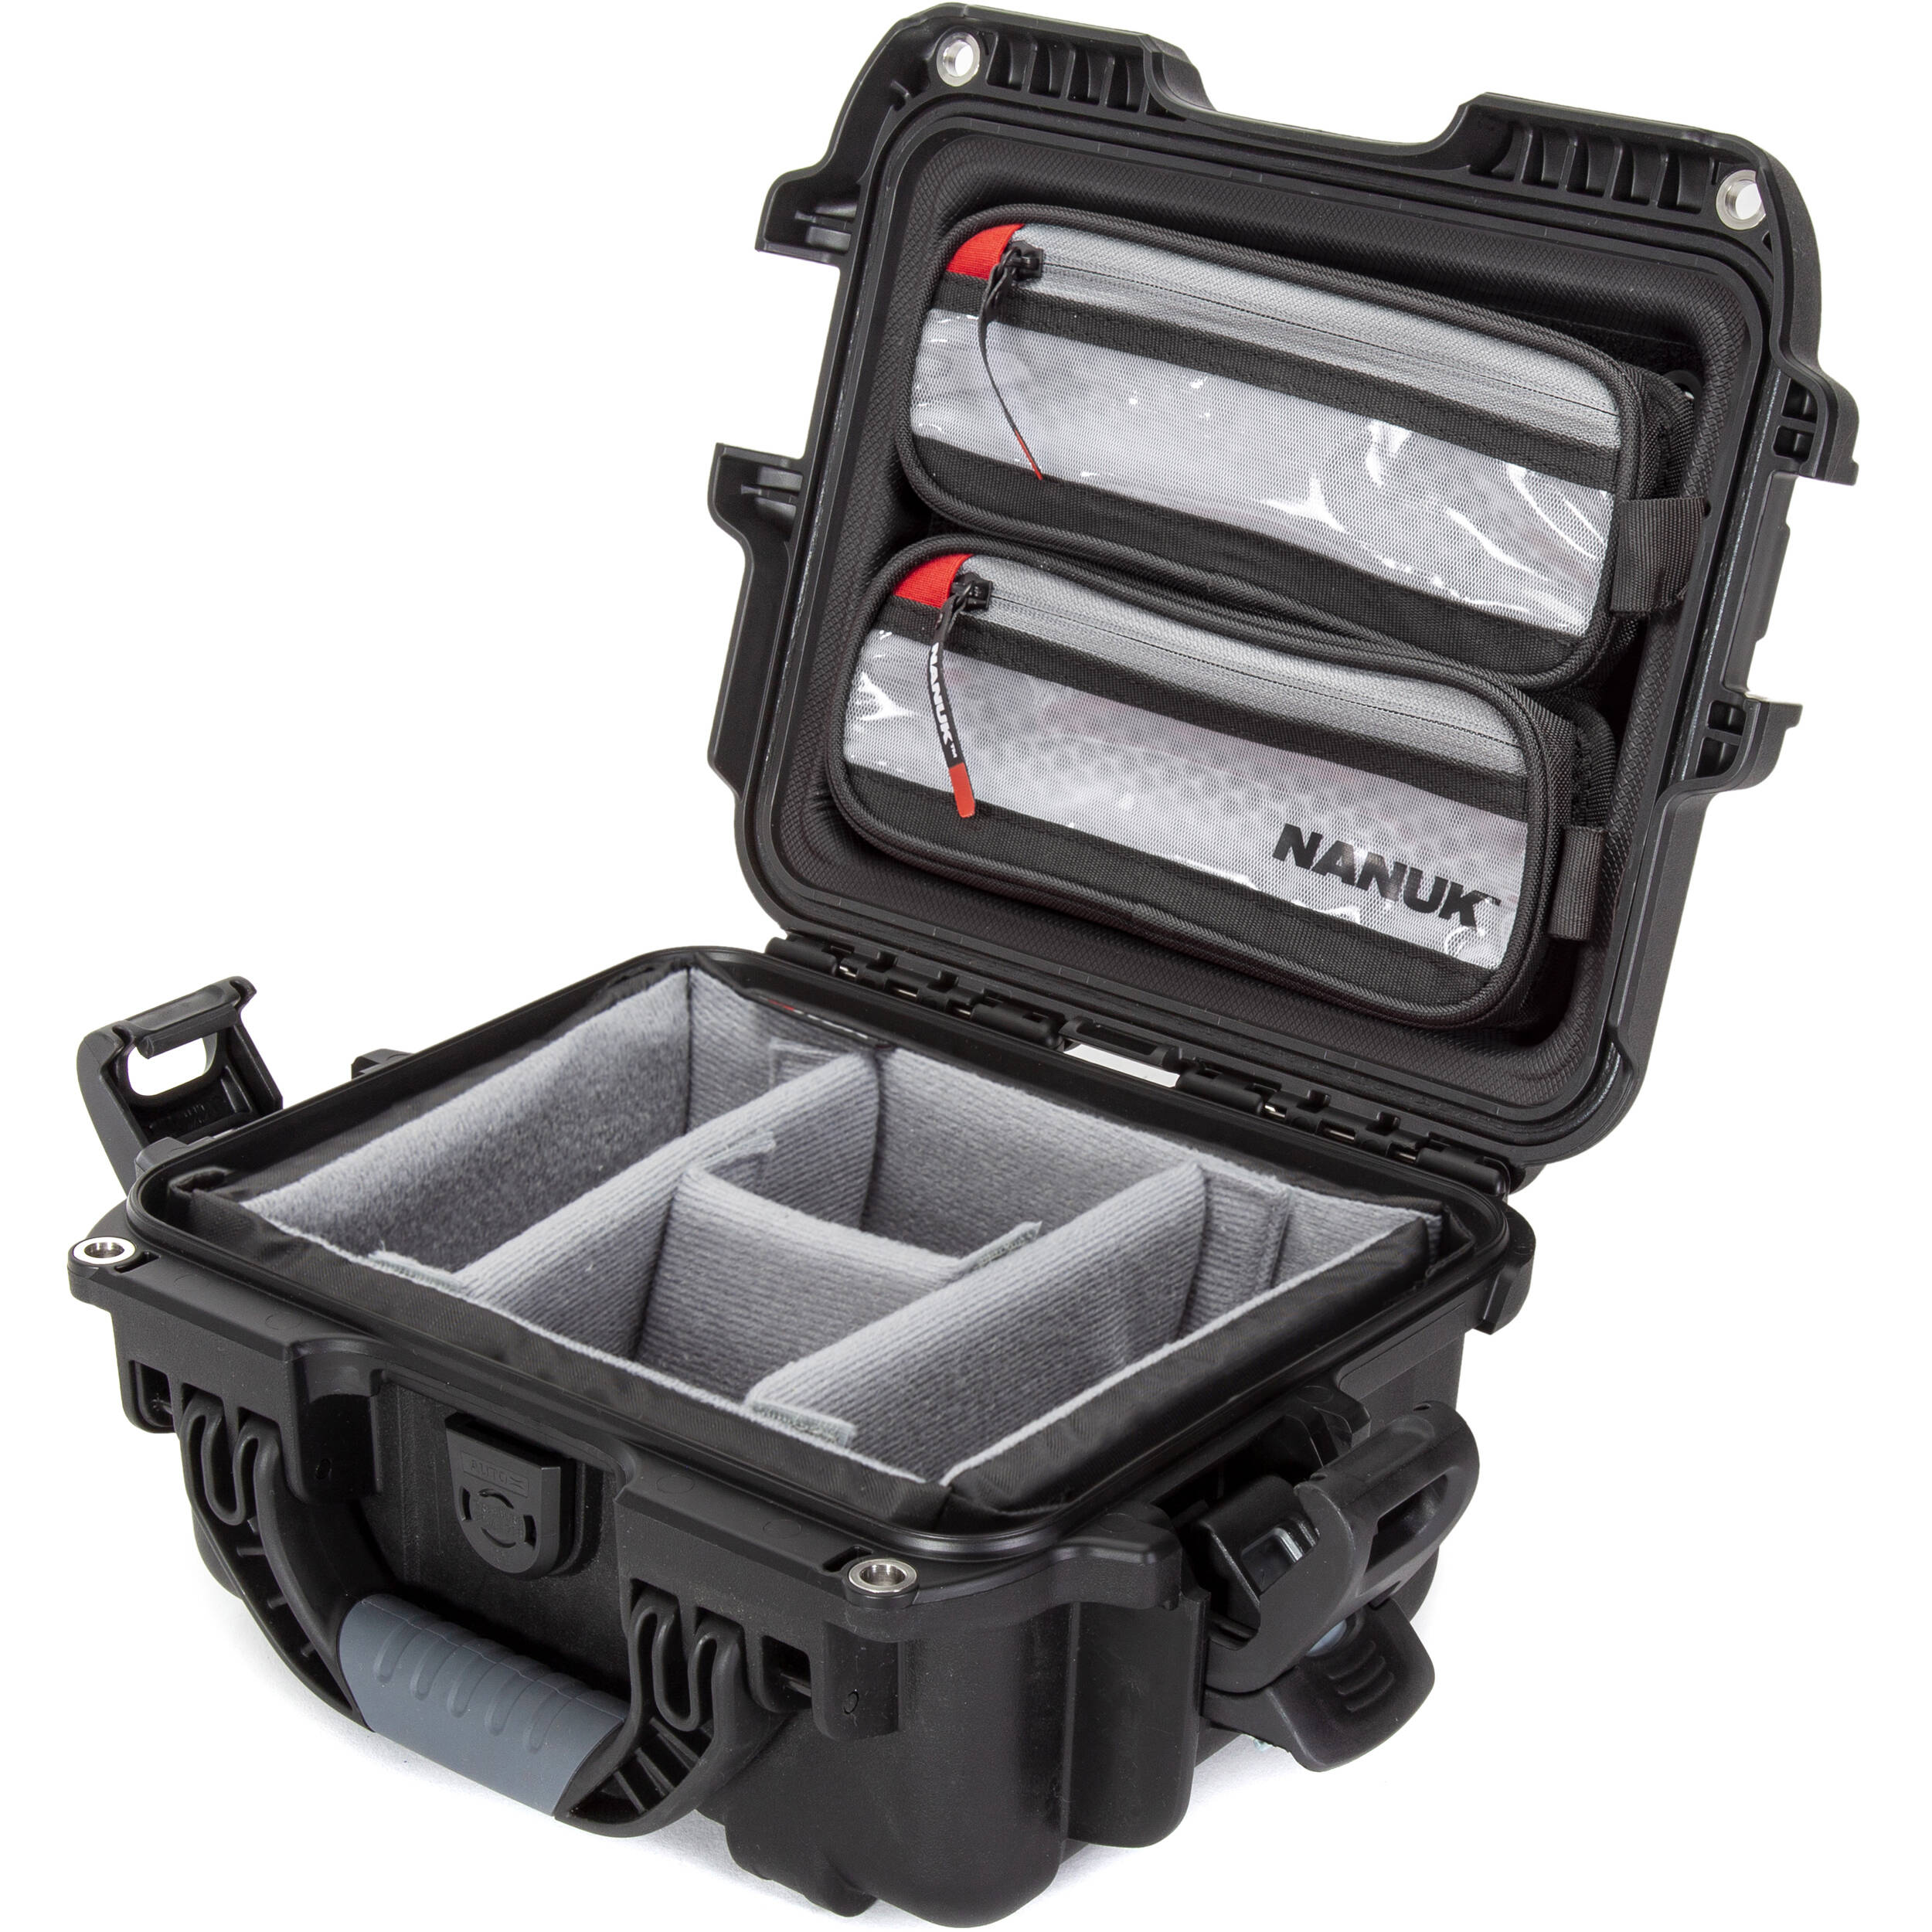 Nanuk 905 Waterproof Hard Case Pro Photo/Video Kit with Padded Dividers and Lid Organizer (Black)